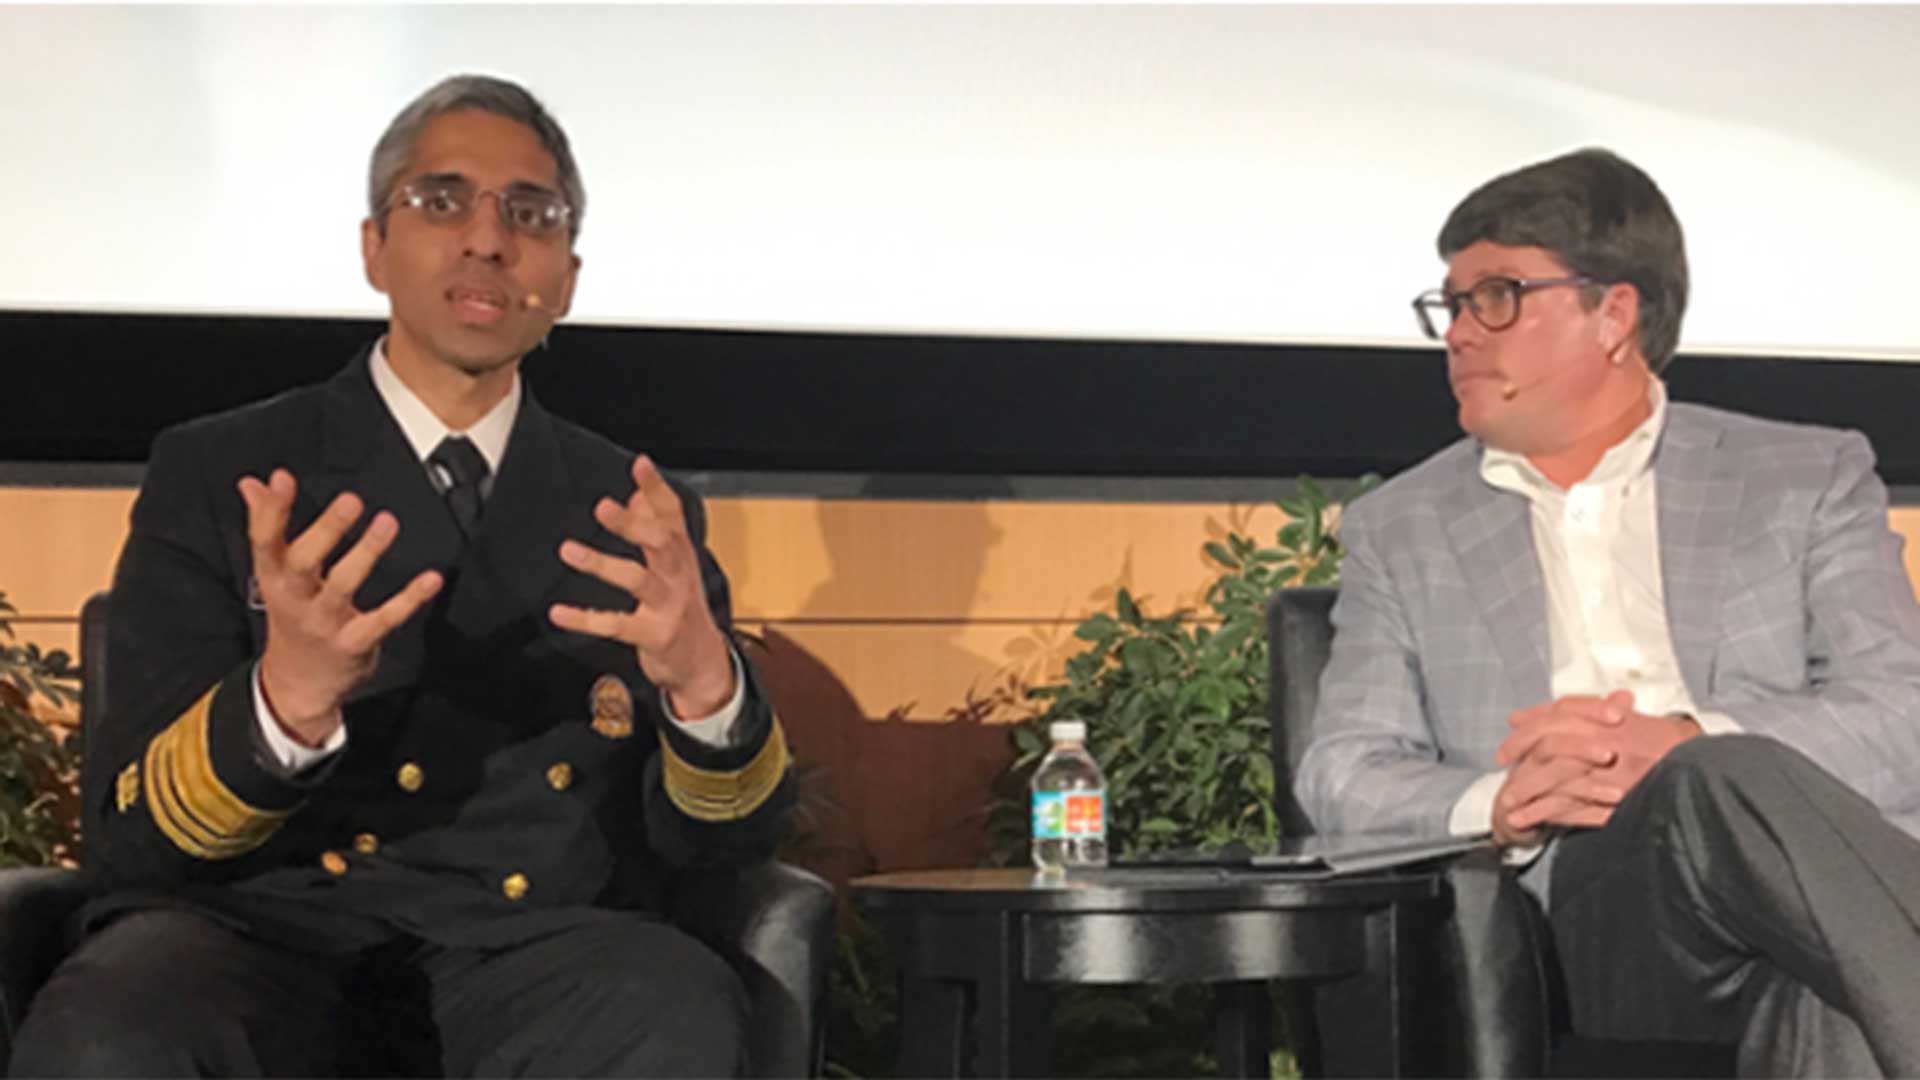 Jeff Arnold and Surgeon General Murthy